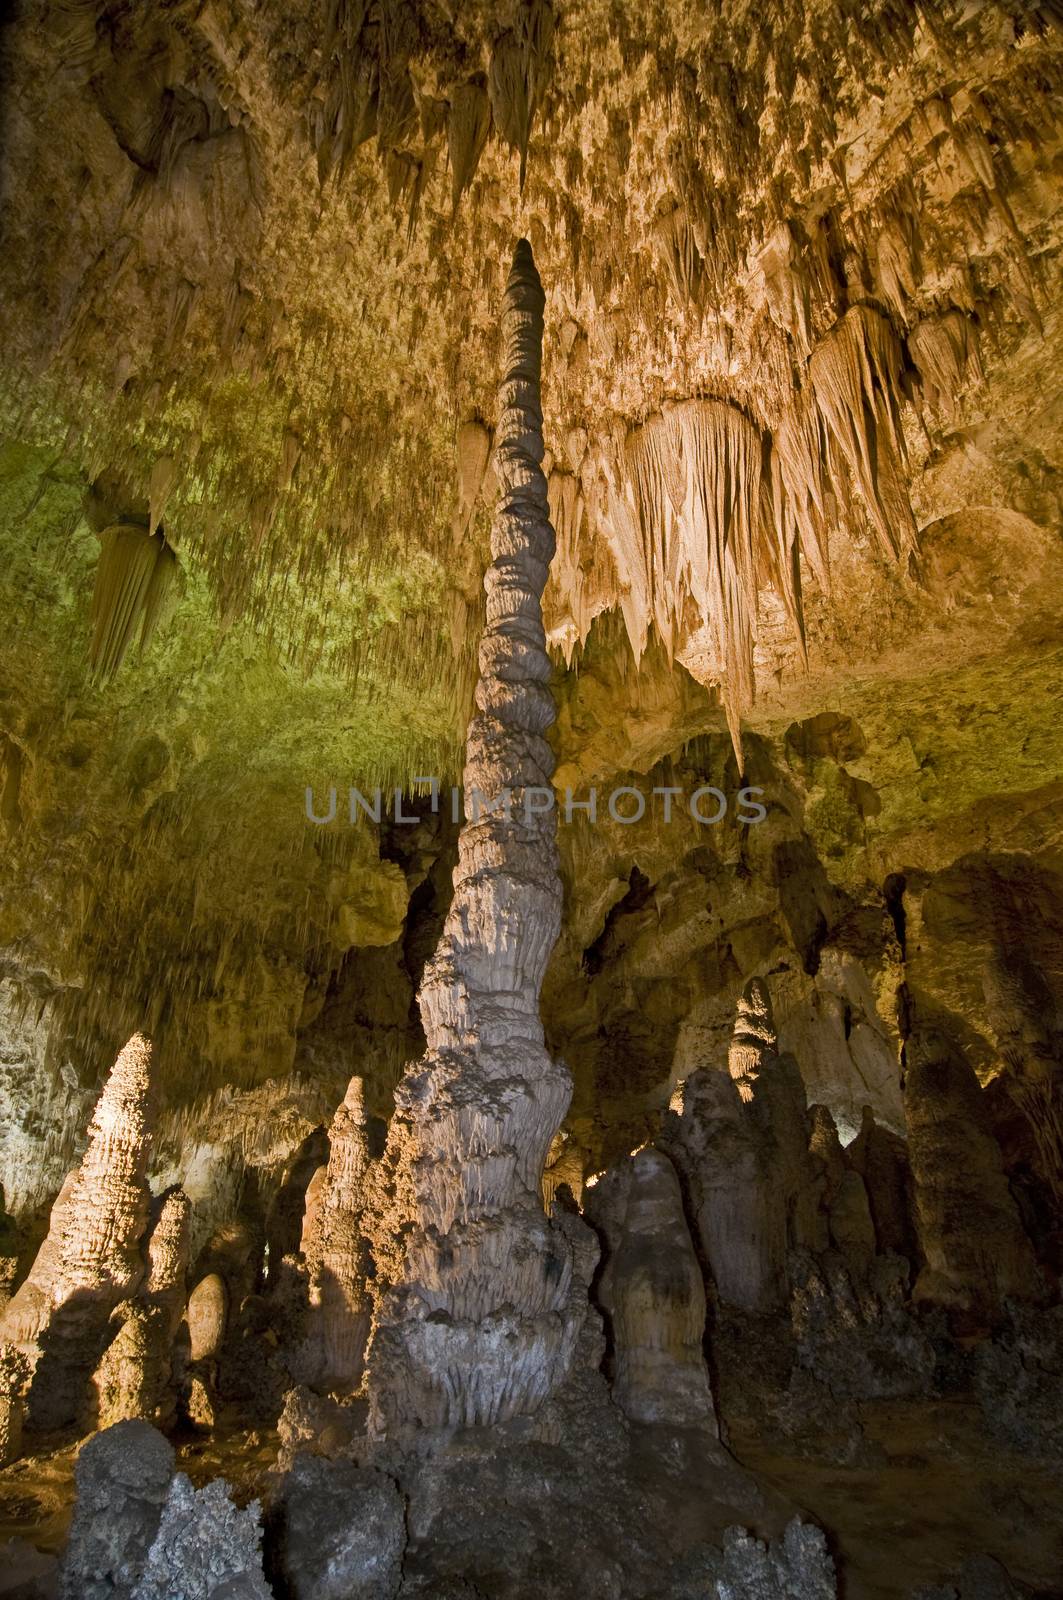 The 'Totem Pole' in the Big Room in Carlsbad Caverns, NM by Njean